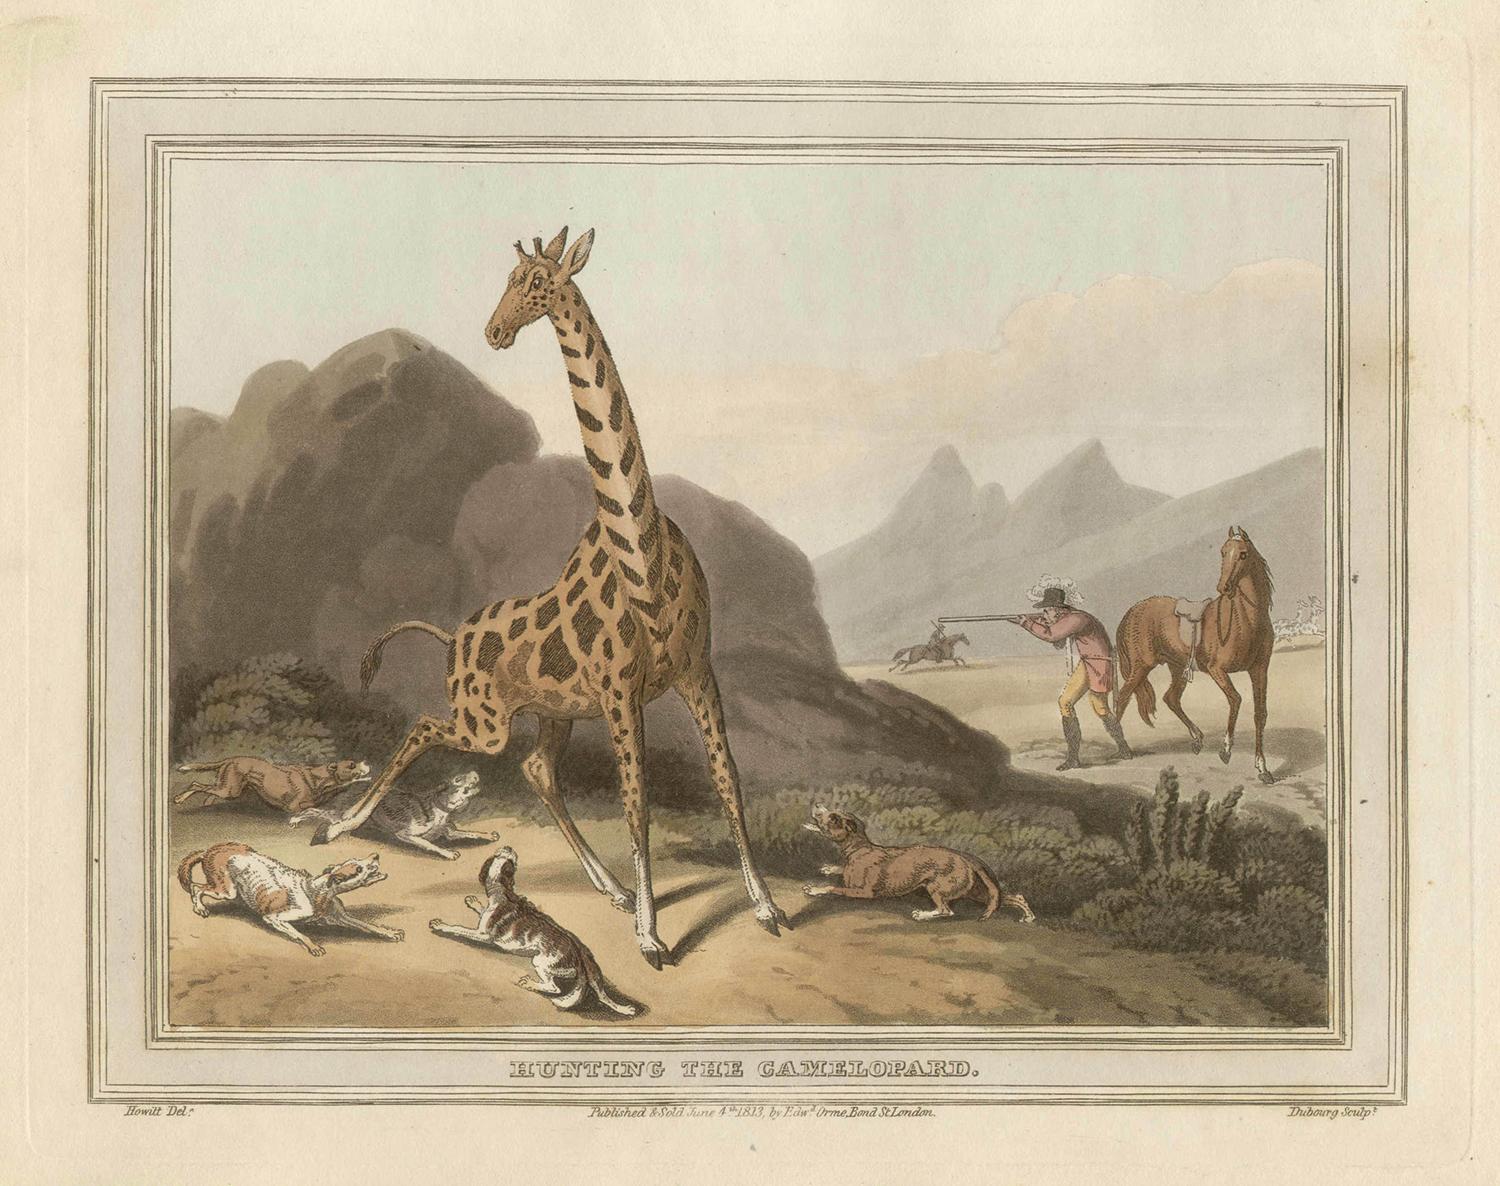 Samuel Howitt Animal Print - Hunting the Camelopard (Giraffe), antique African hunting engraving print, 1813